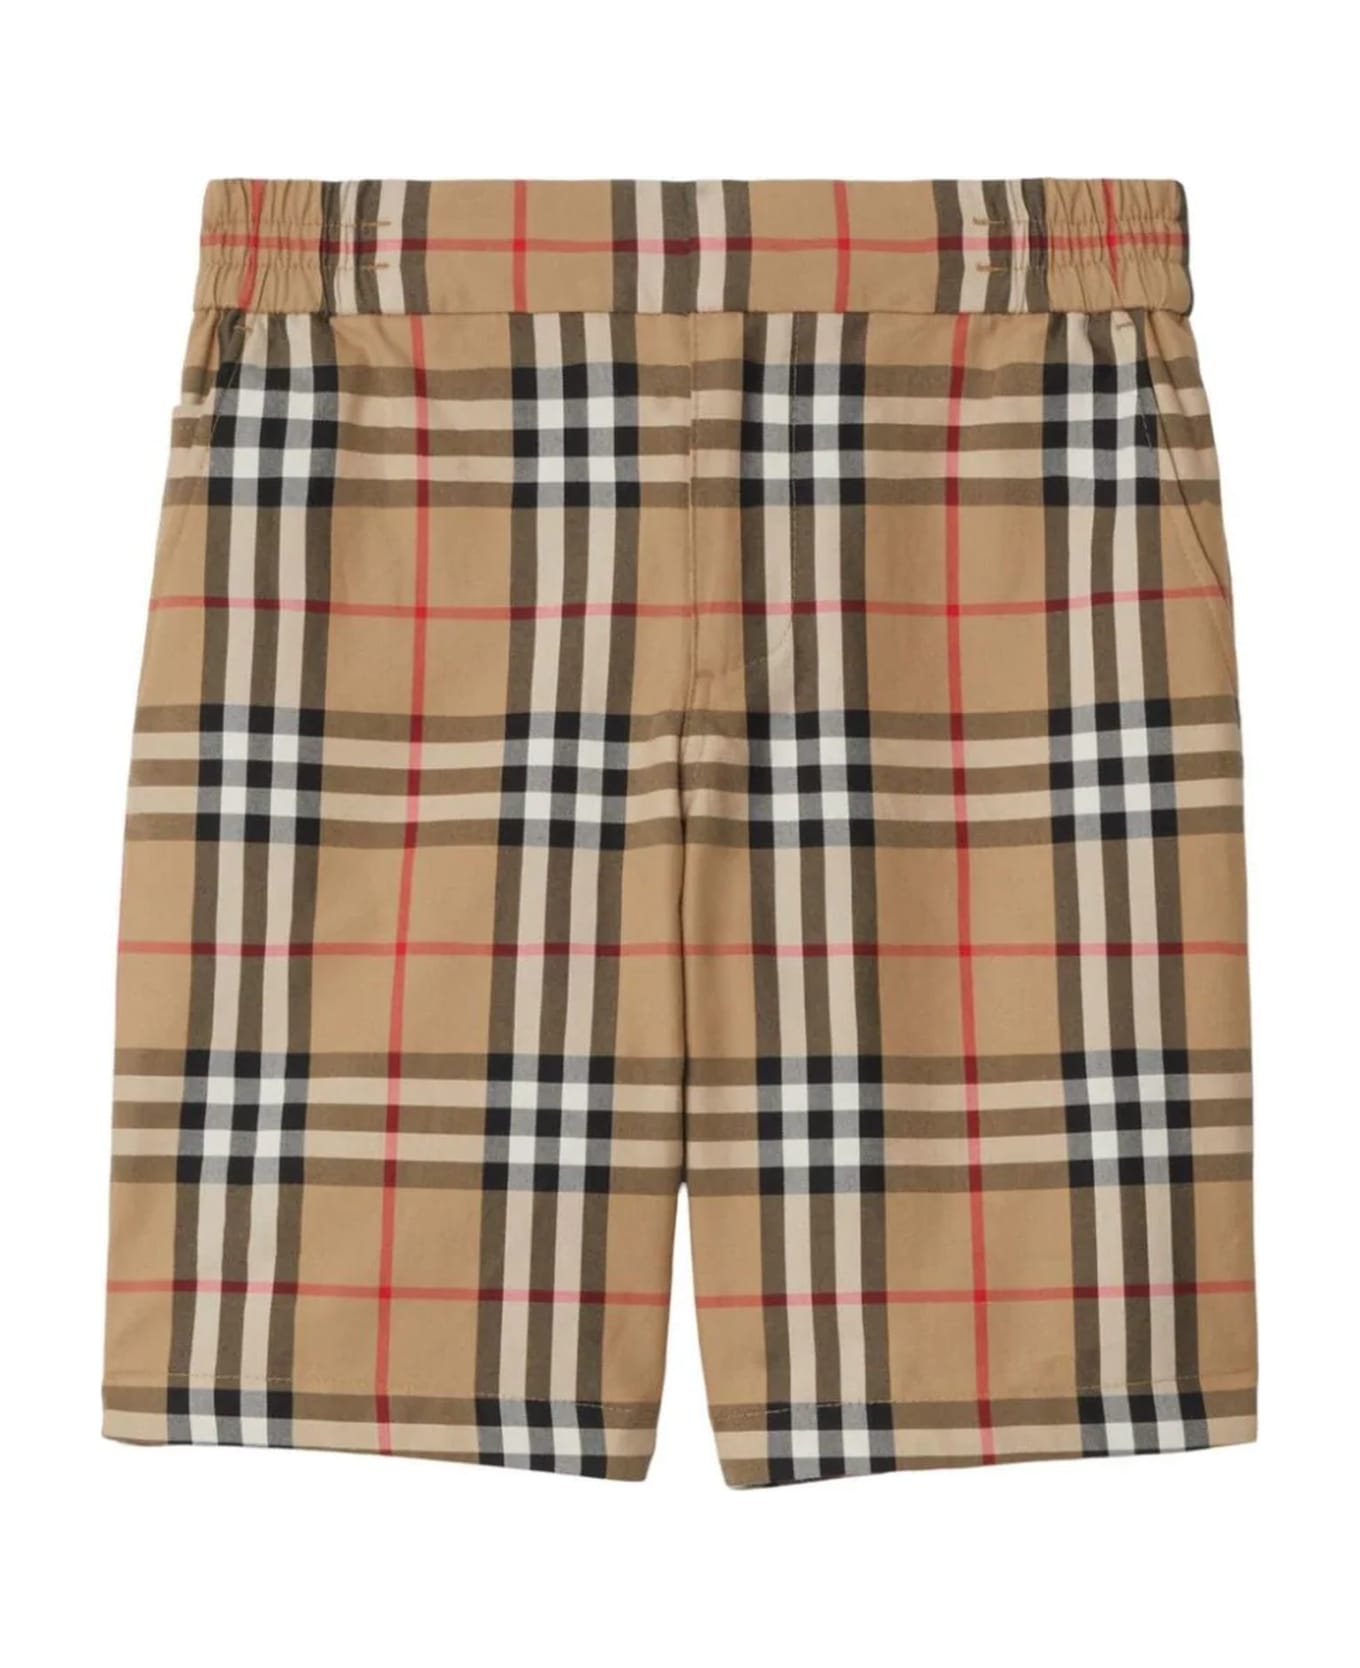 Burberry Beige Cotton Shorts ボトムス